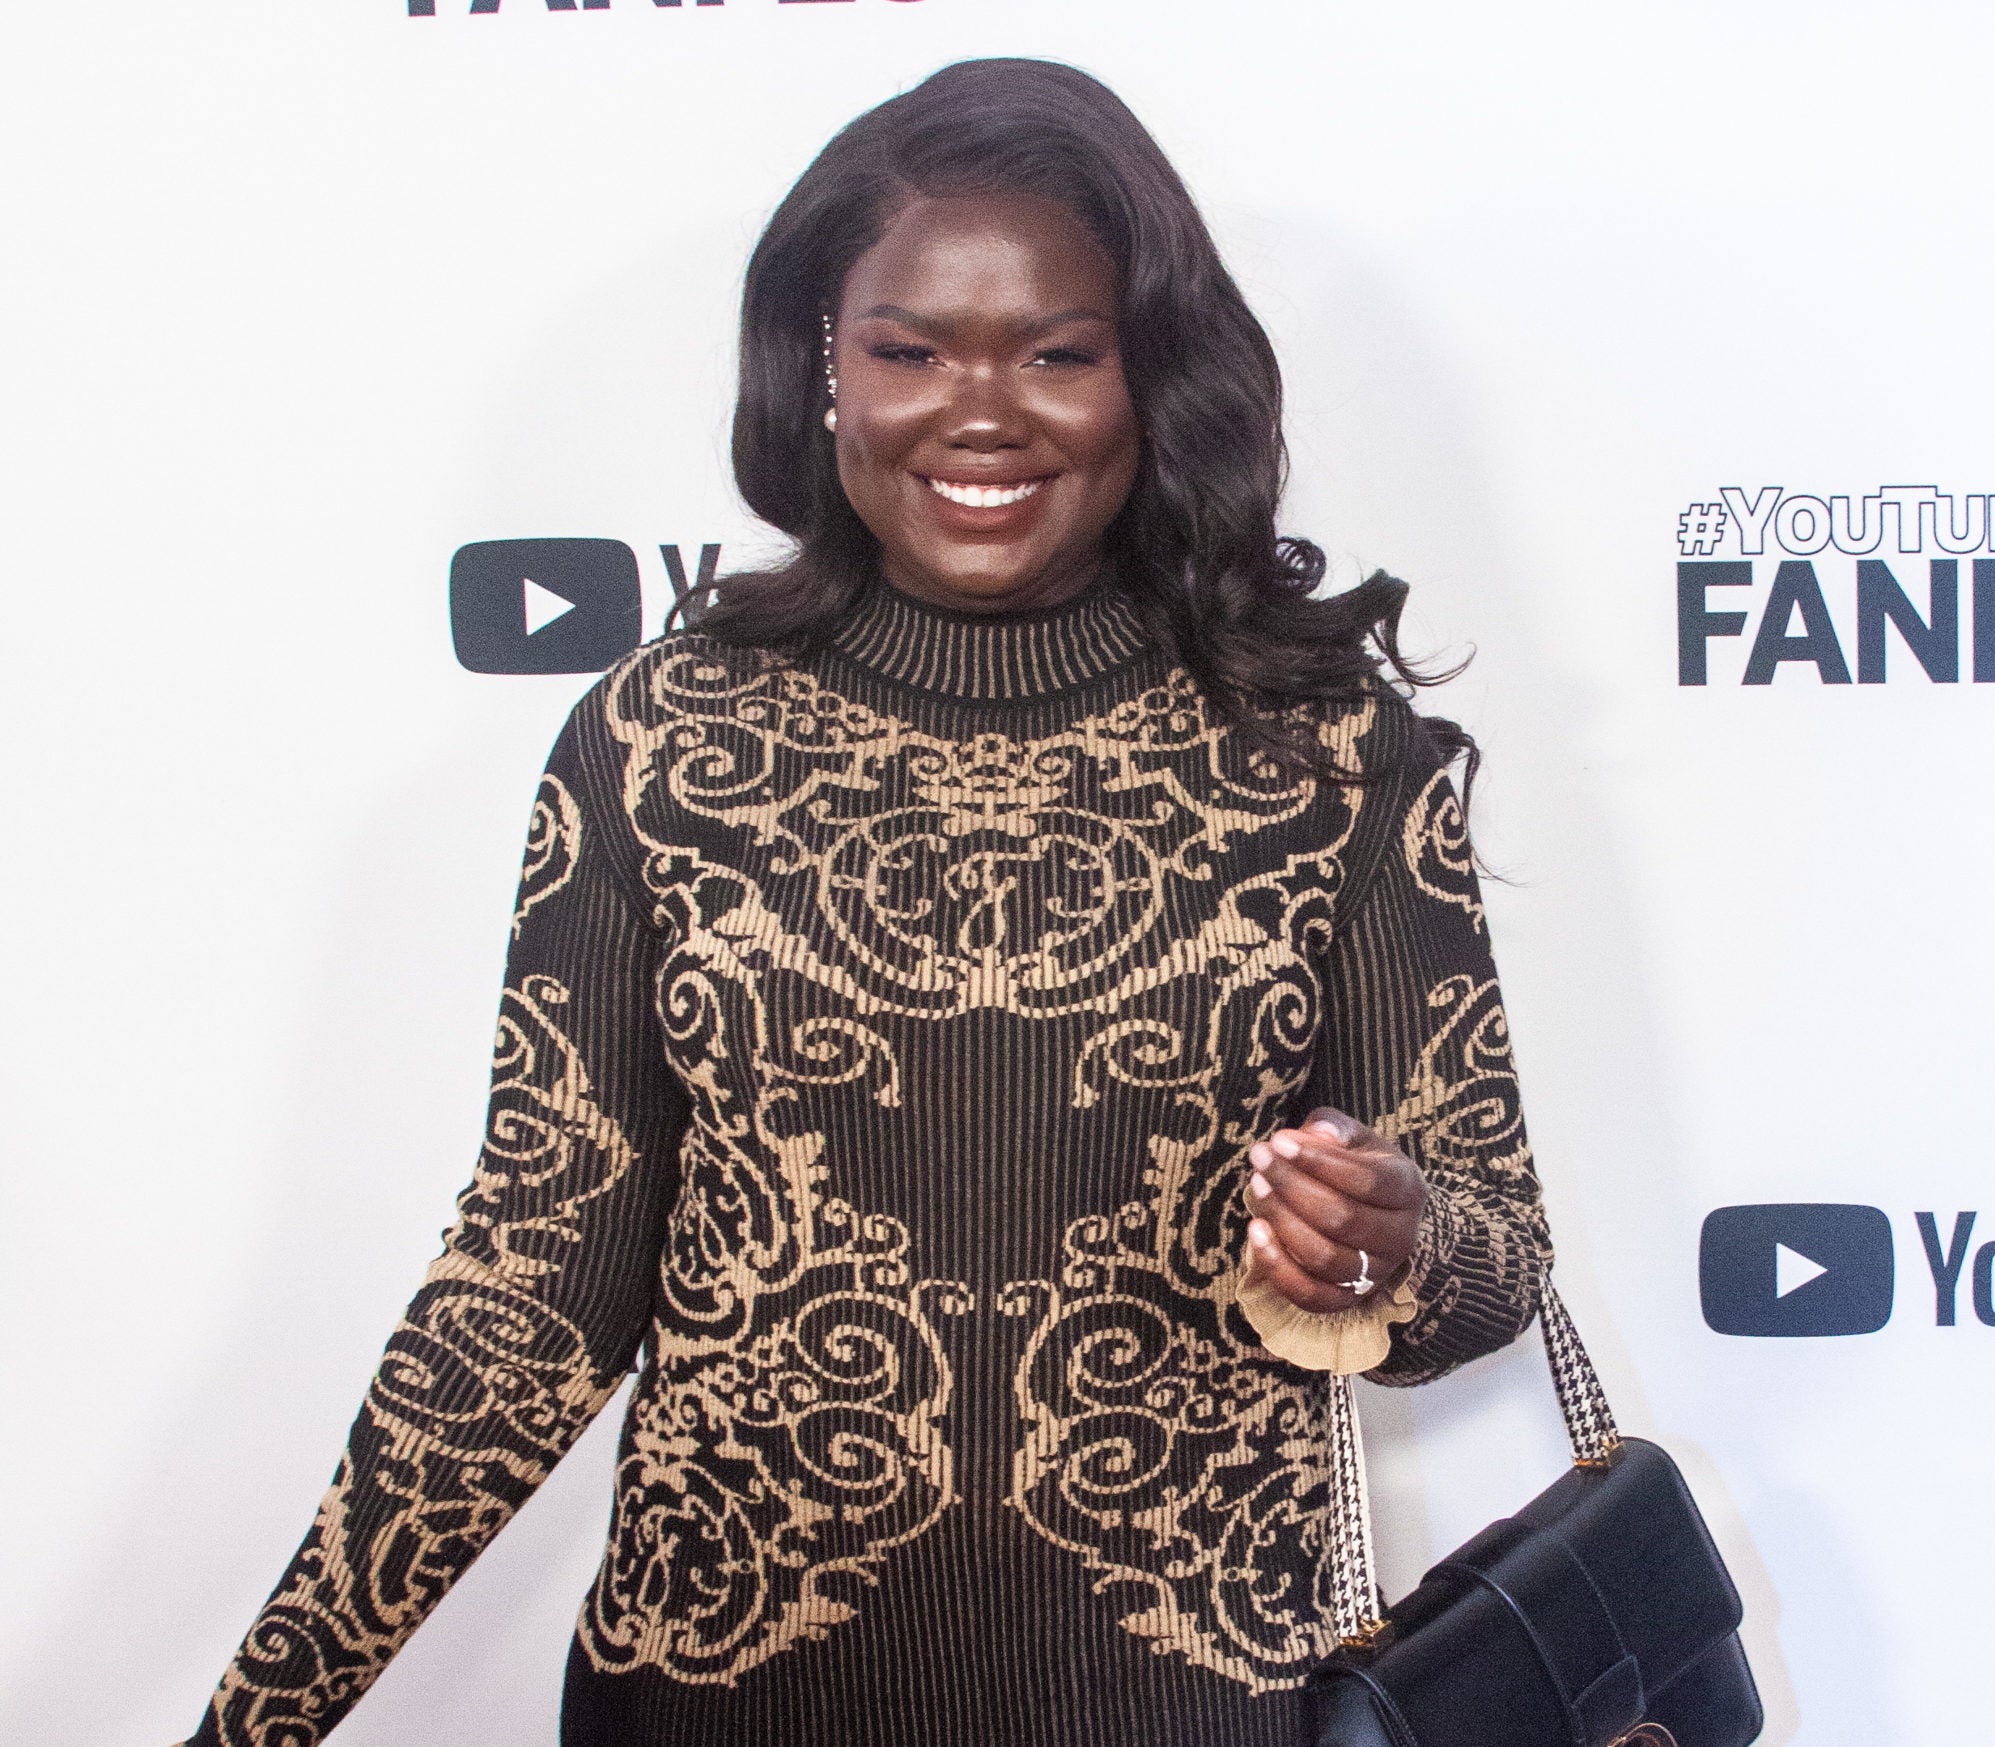 Celebrities And Influencers Were Fresh-Faced At #YouTubeBlack FanFest